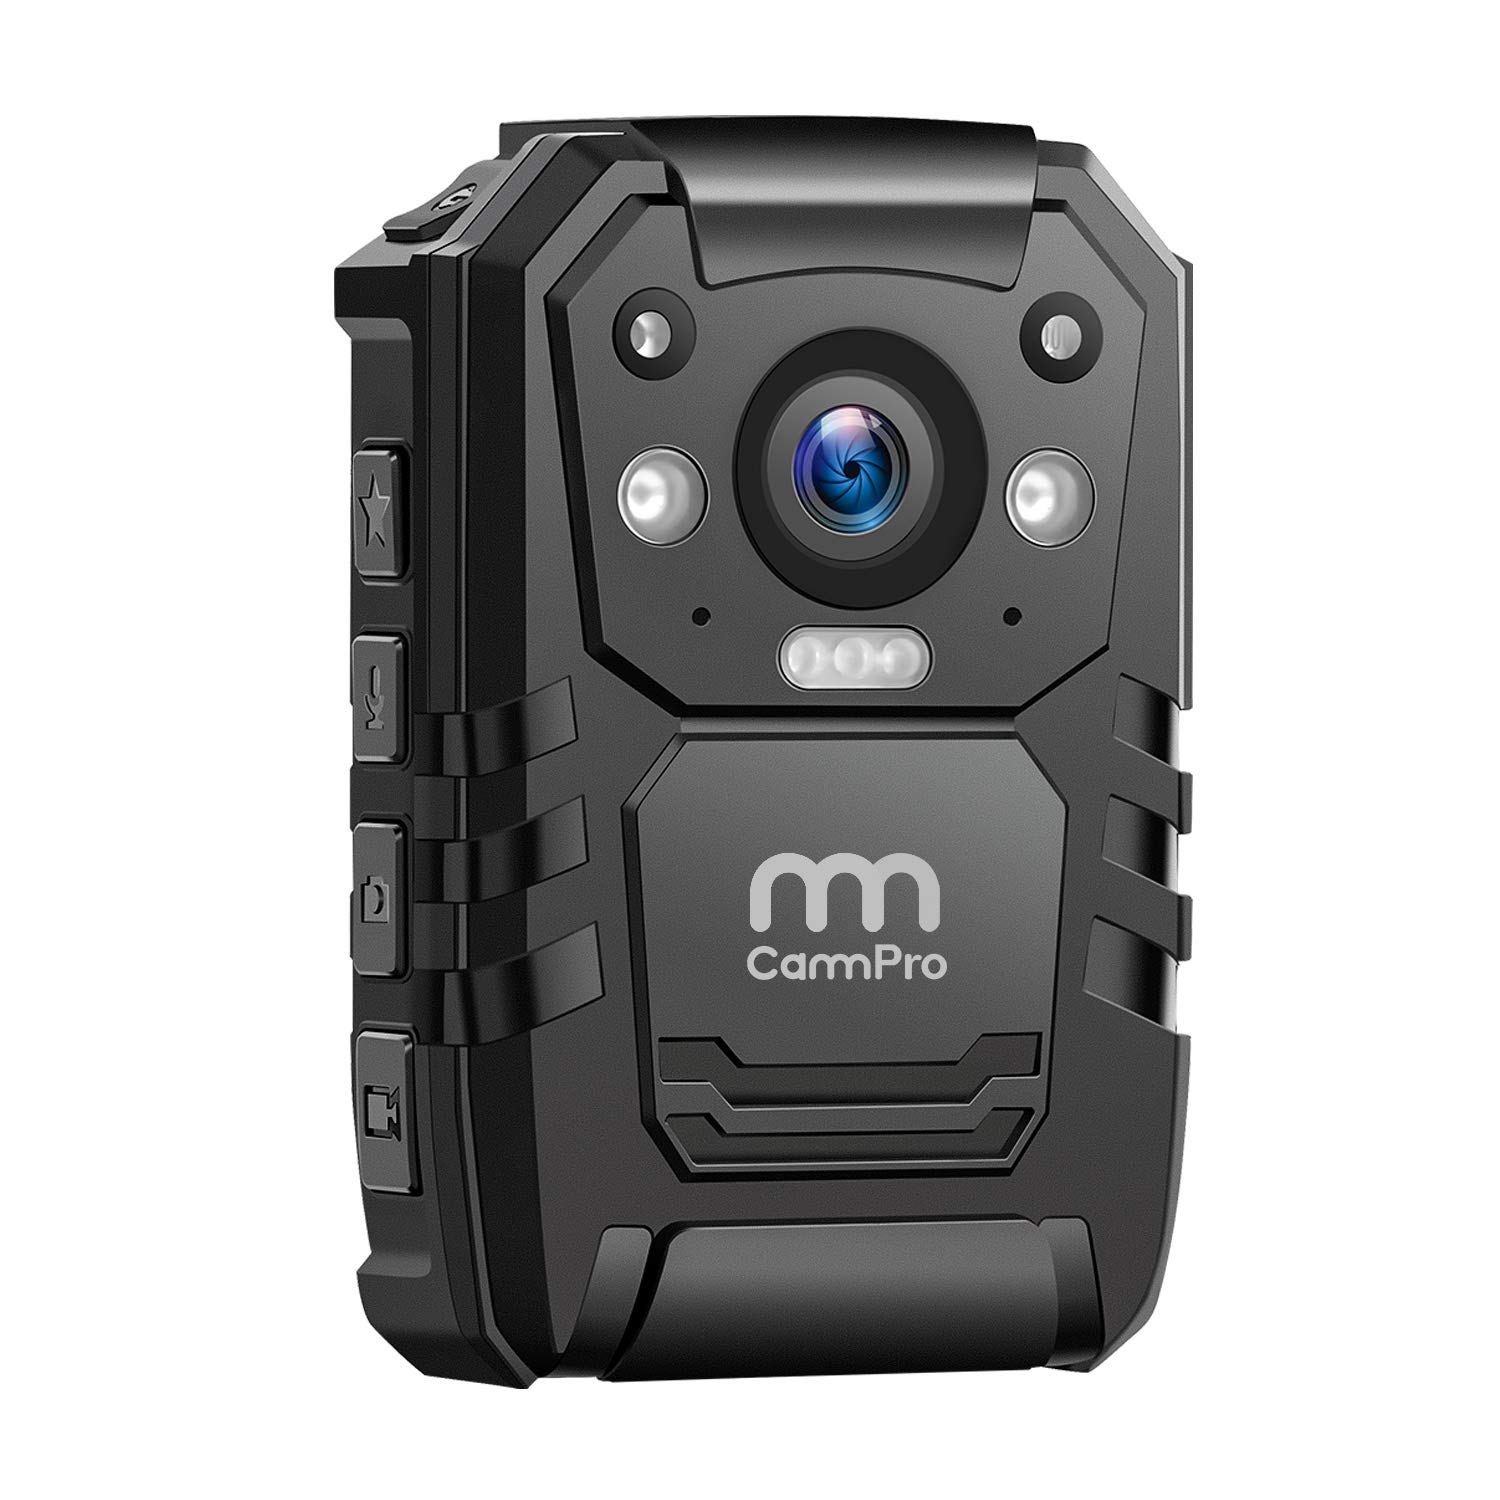 CammPro 1296P HD Police Body Camera,32G Memory, Premium Portable Body Camera,Waterproof Body-Worn Camera with 2 Inch Display,Night Vision,GPS for Law Enforcement Recorder,Security Guards,Personal Use